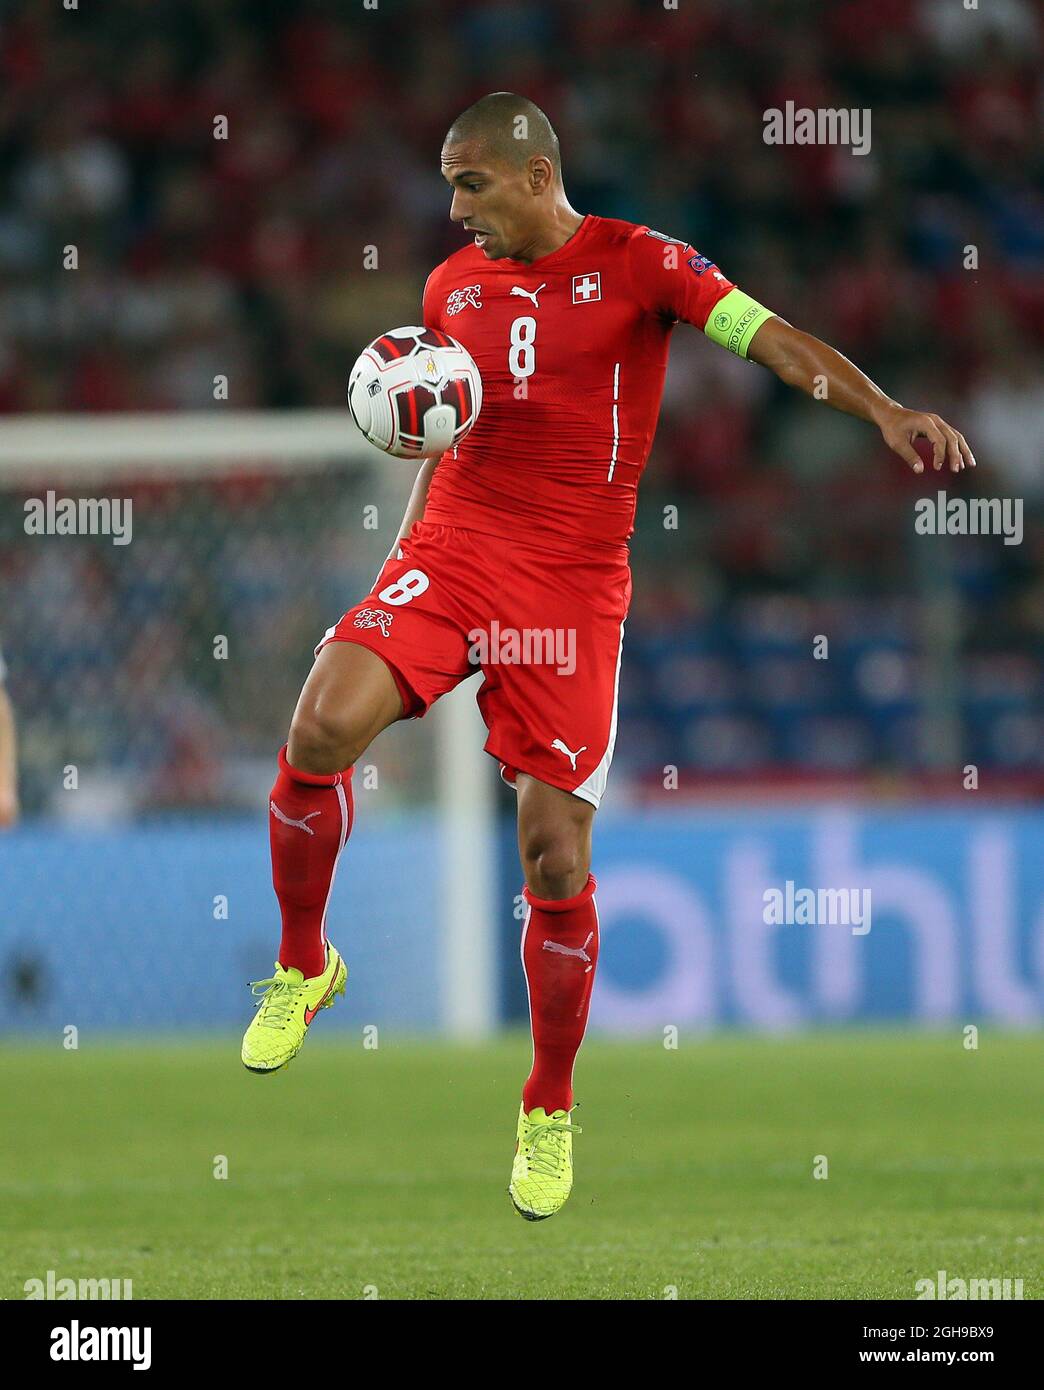 Switzerland S Gokhan Inler In Action During The Euro 16 Qualifier Group E Match Between Switzerland And England At St Jakob Park In Switzerland On September 8 14 David Klein Stock Photo Alamy